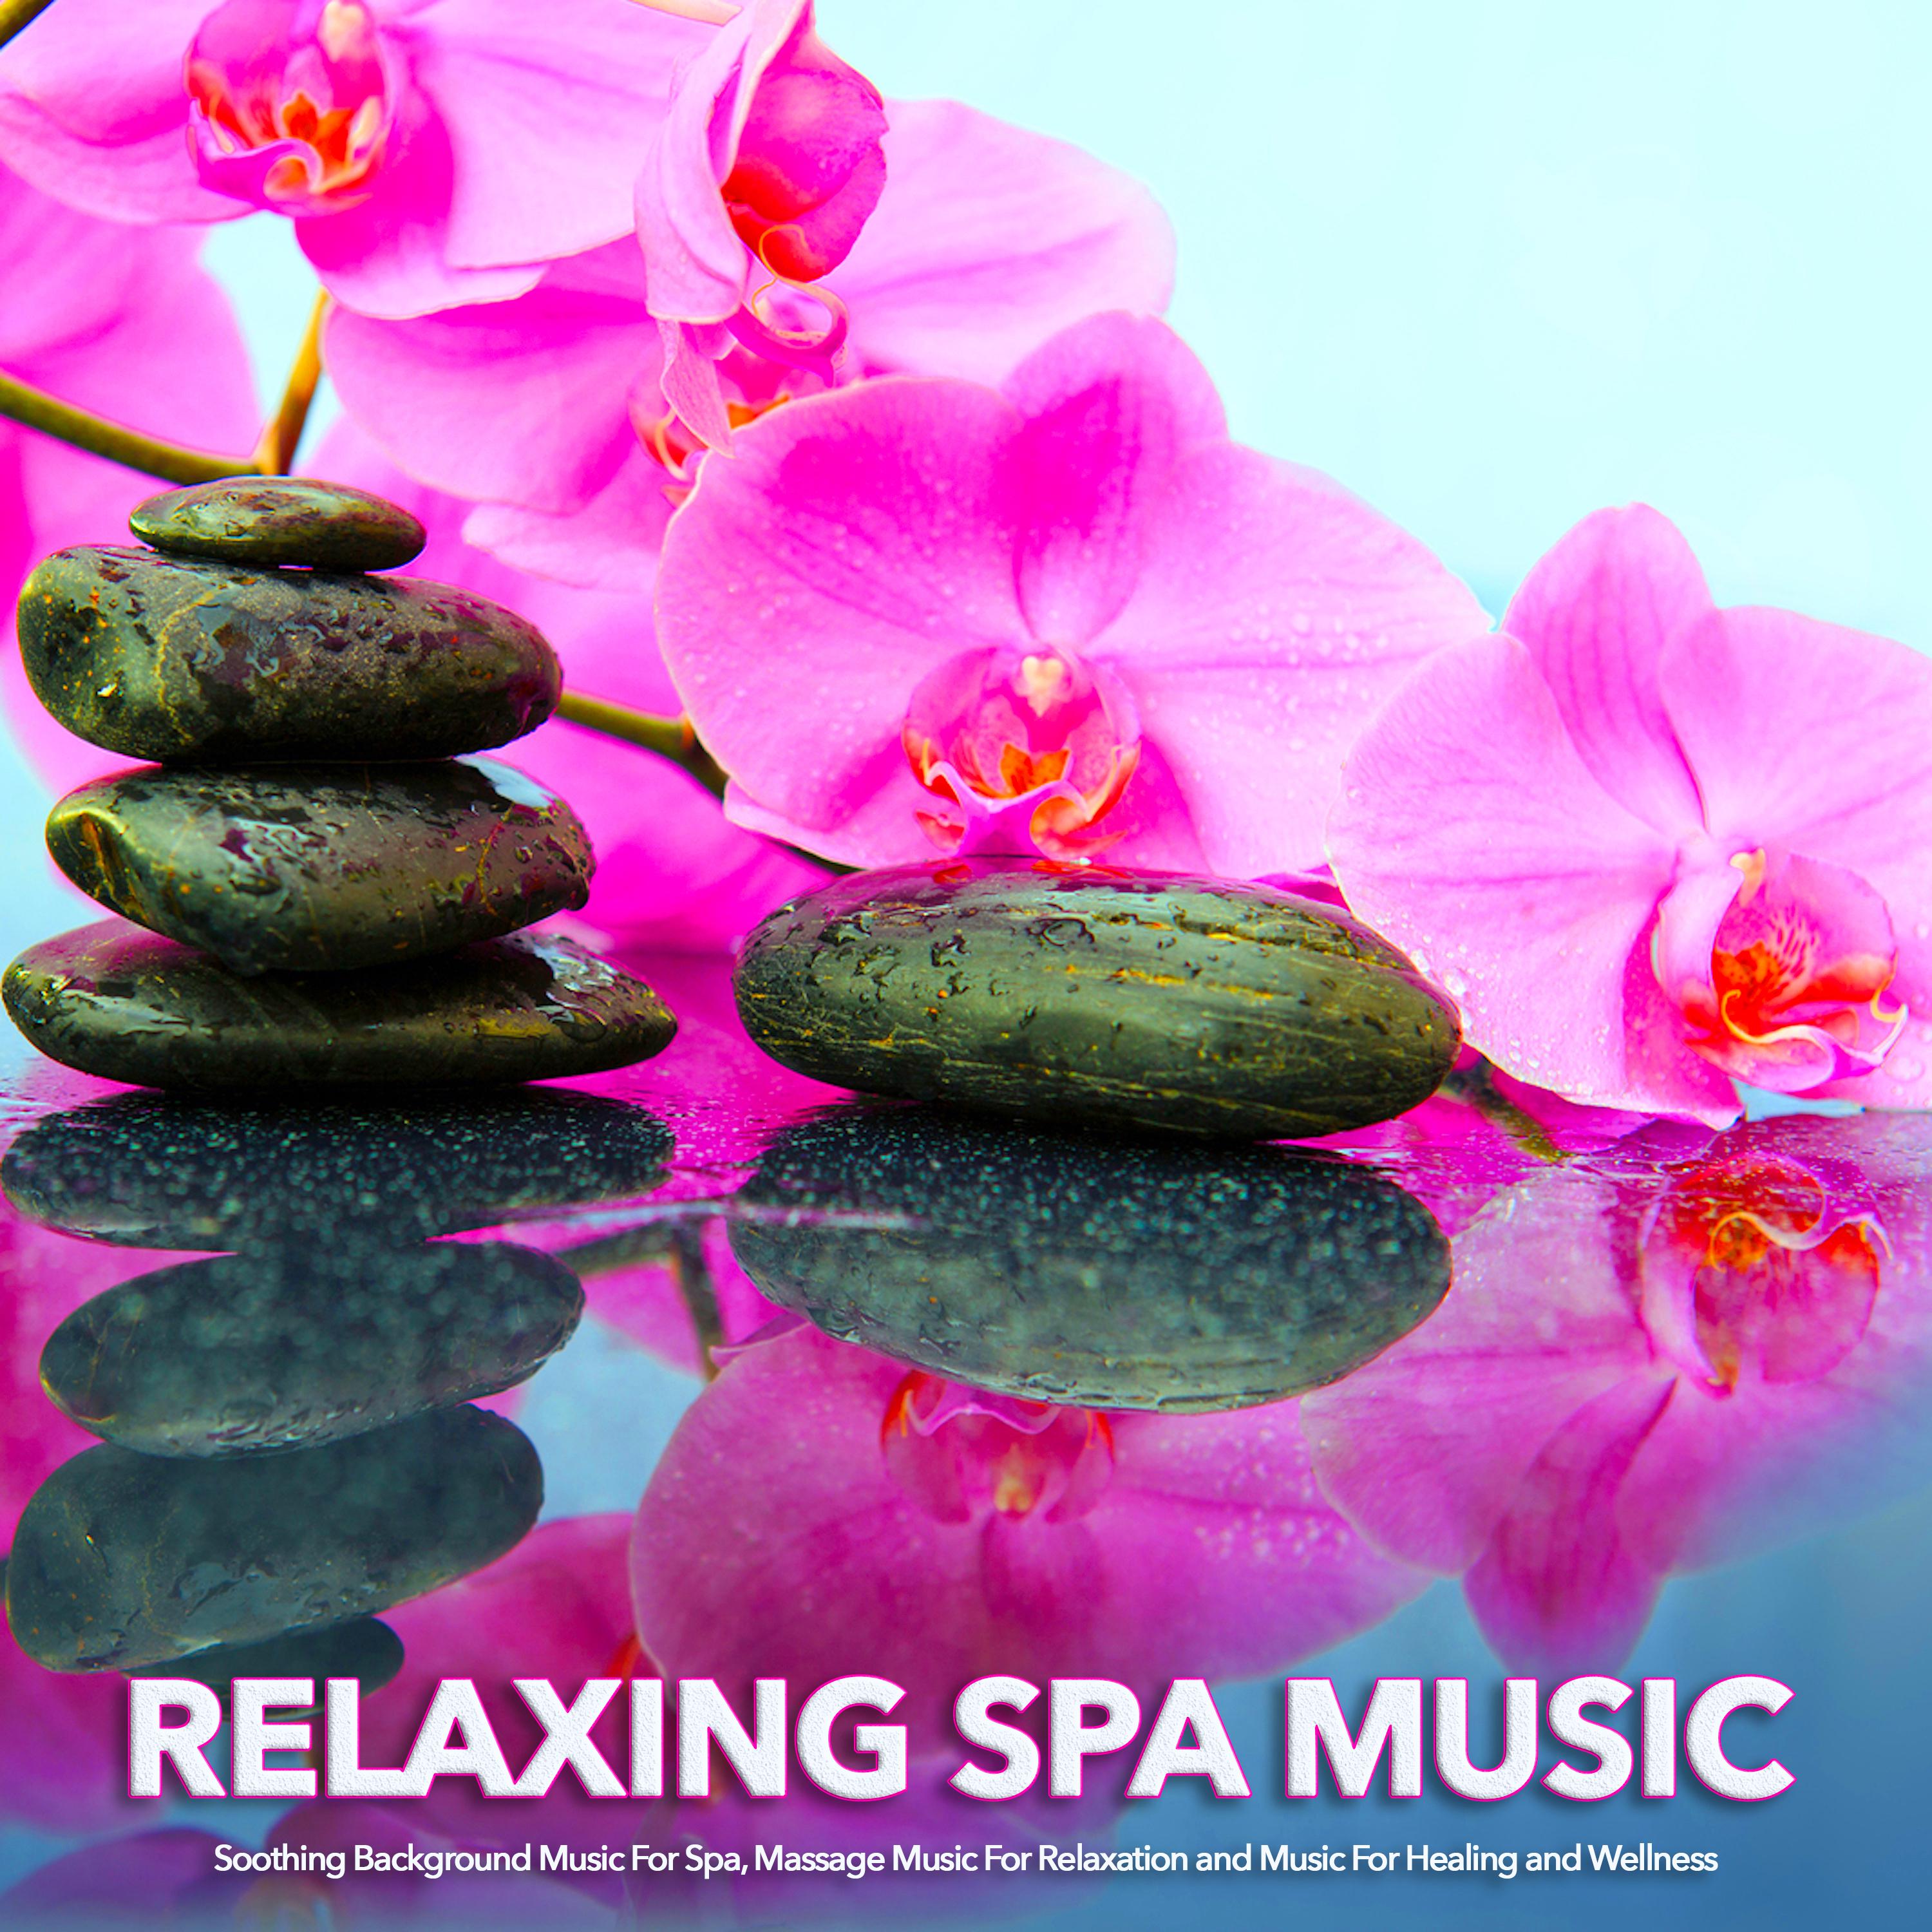 Background Music For Relaxation